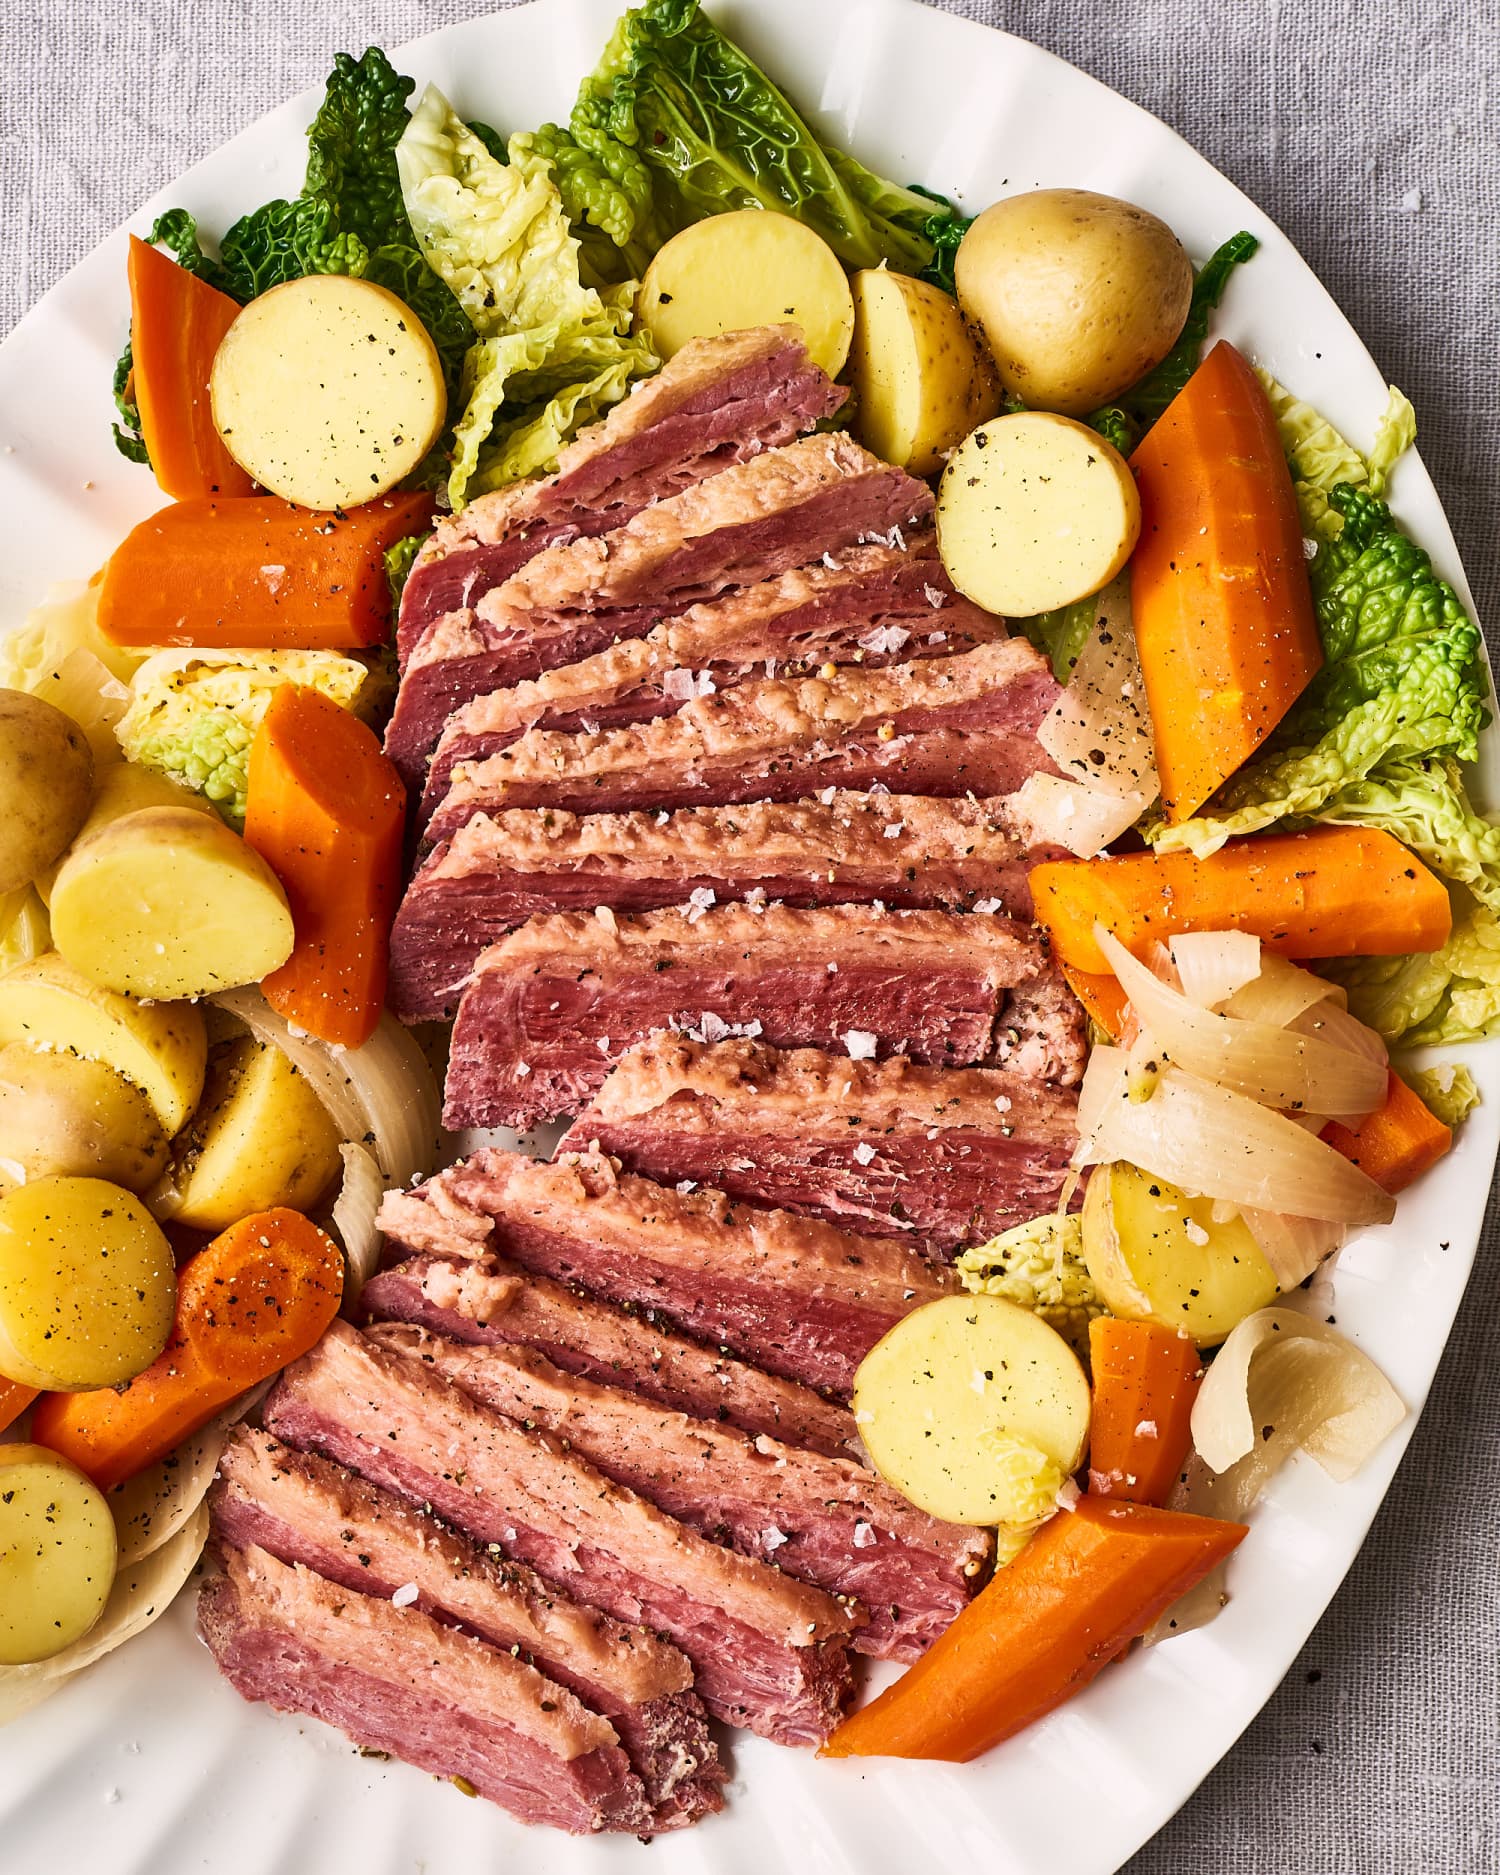 How To Make The Best Easiest Slow Cooker Corned Beef And